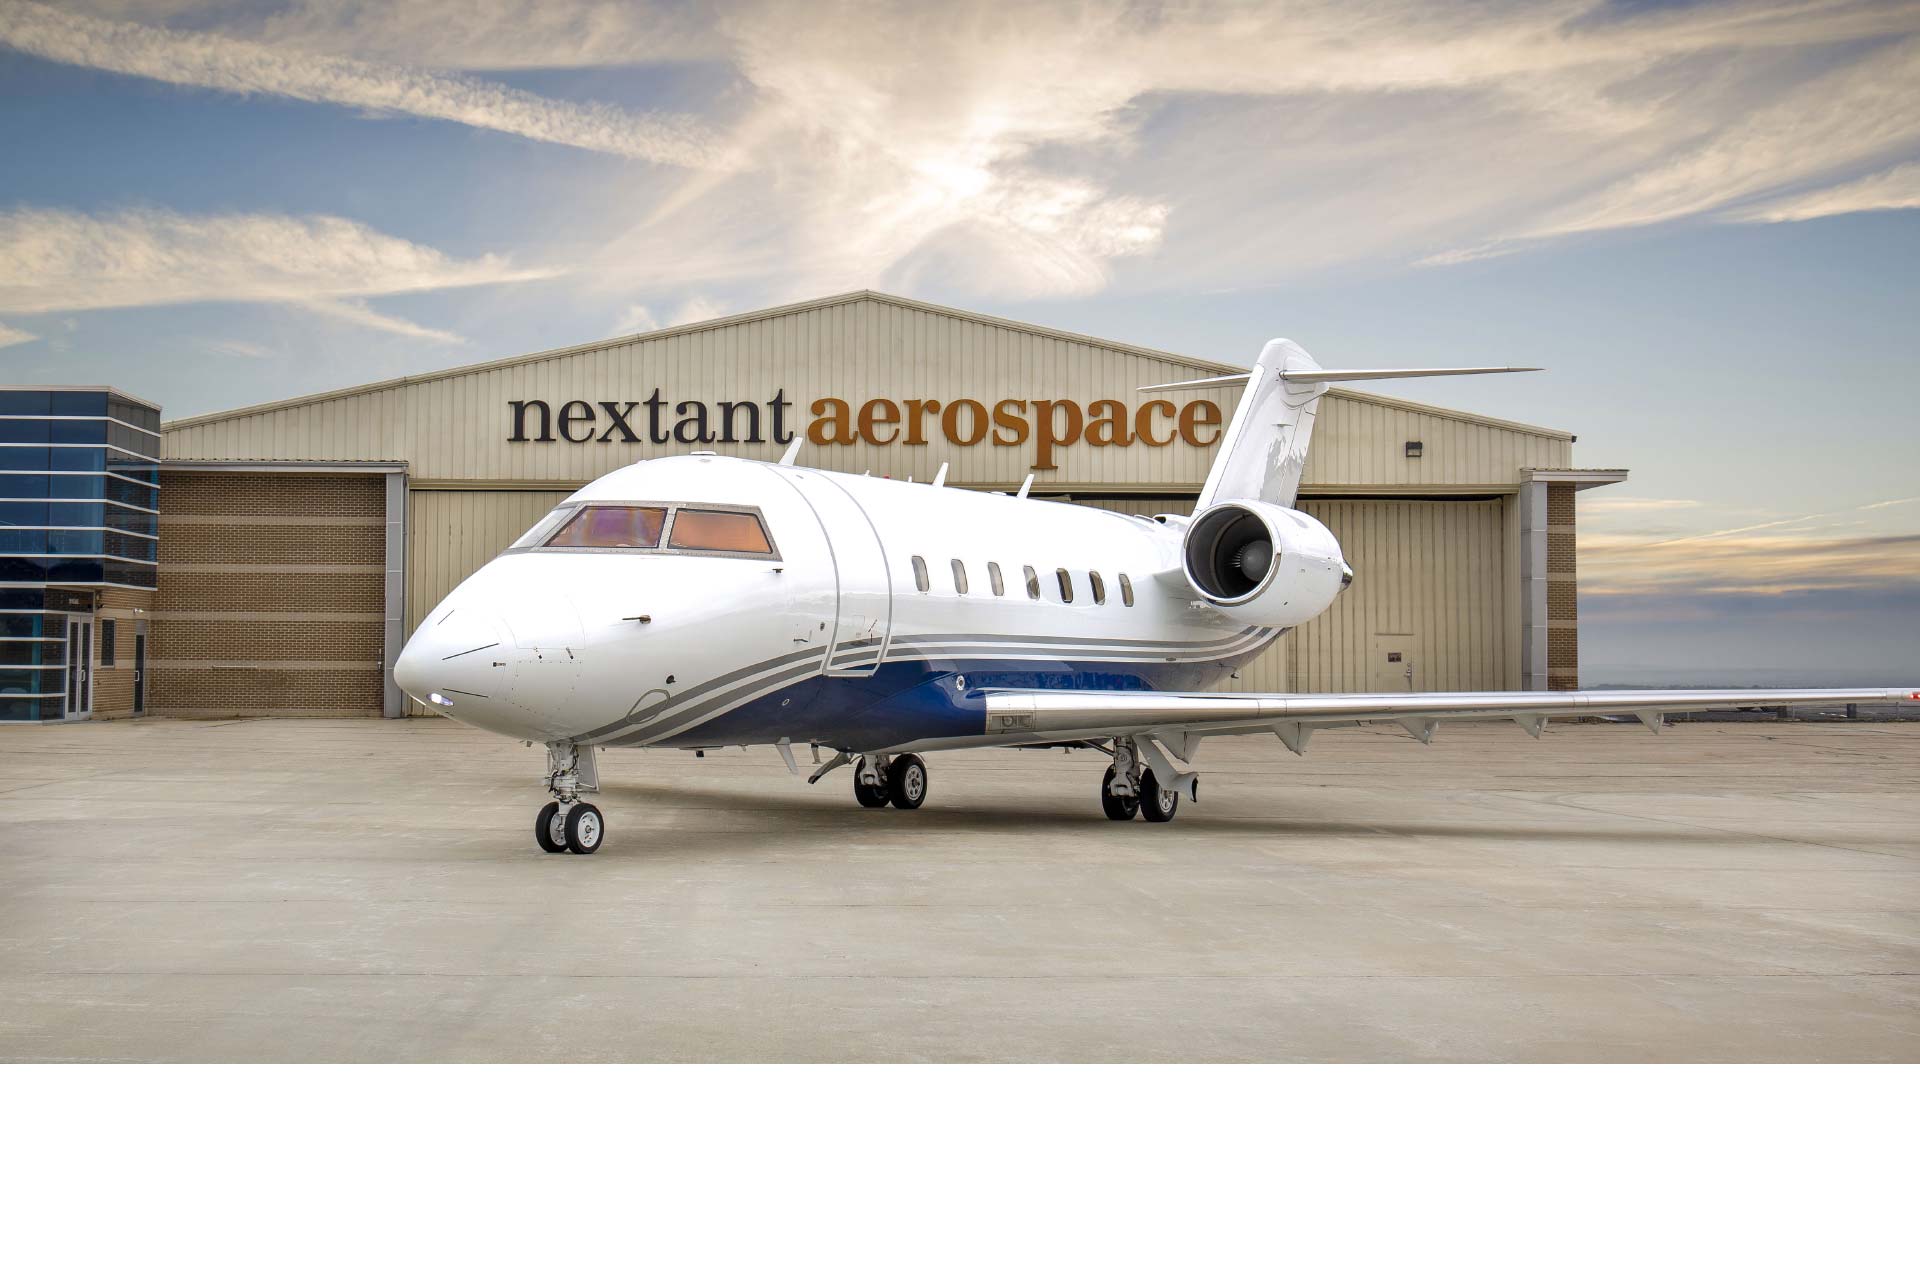 The Nextant Aerospace 604XT is a remanufactured super-mid sized business jet, based on the Bombardier Challenger 604.